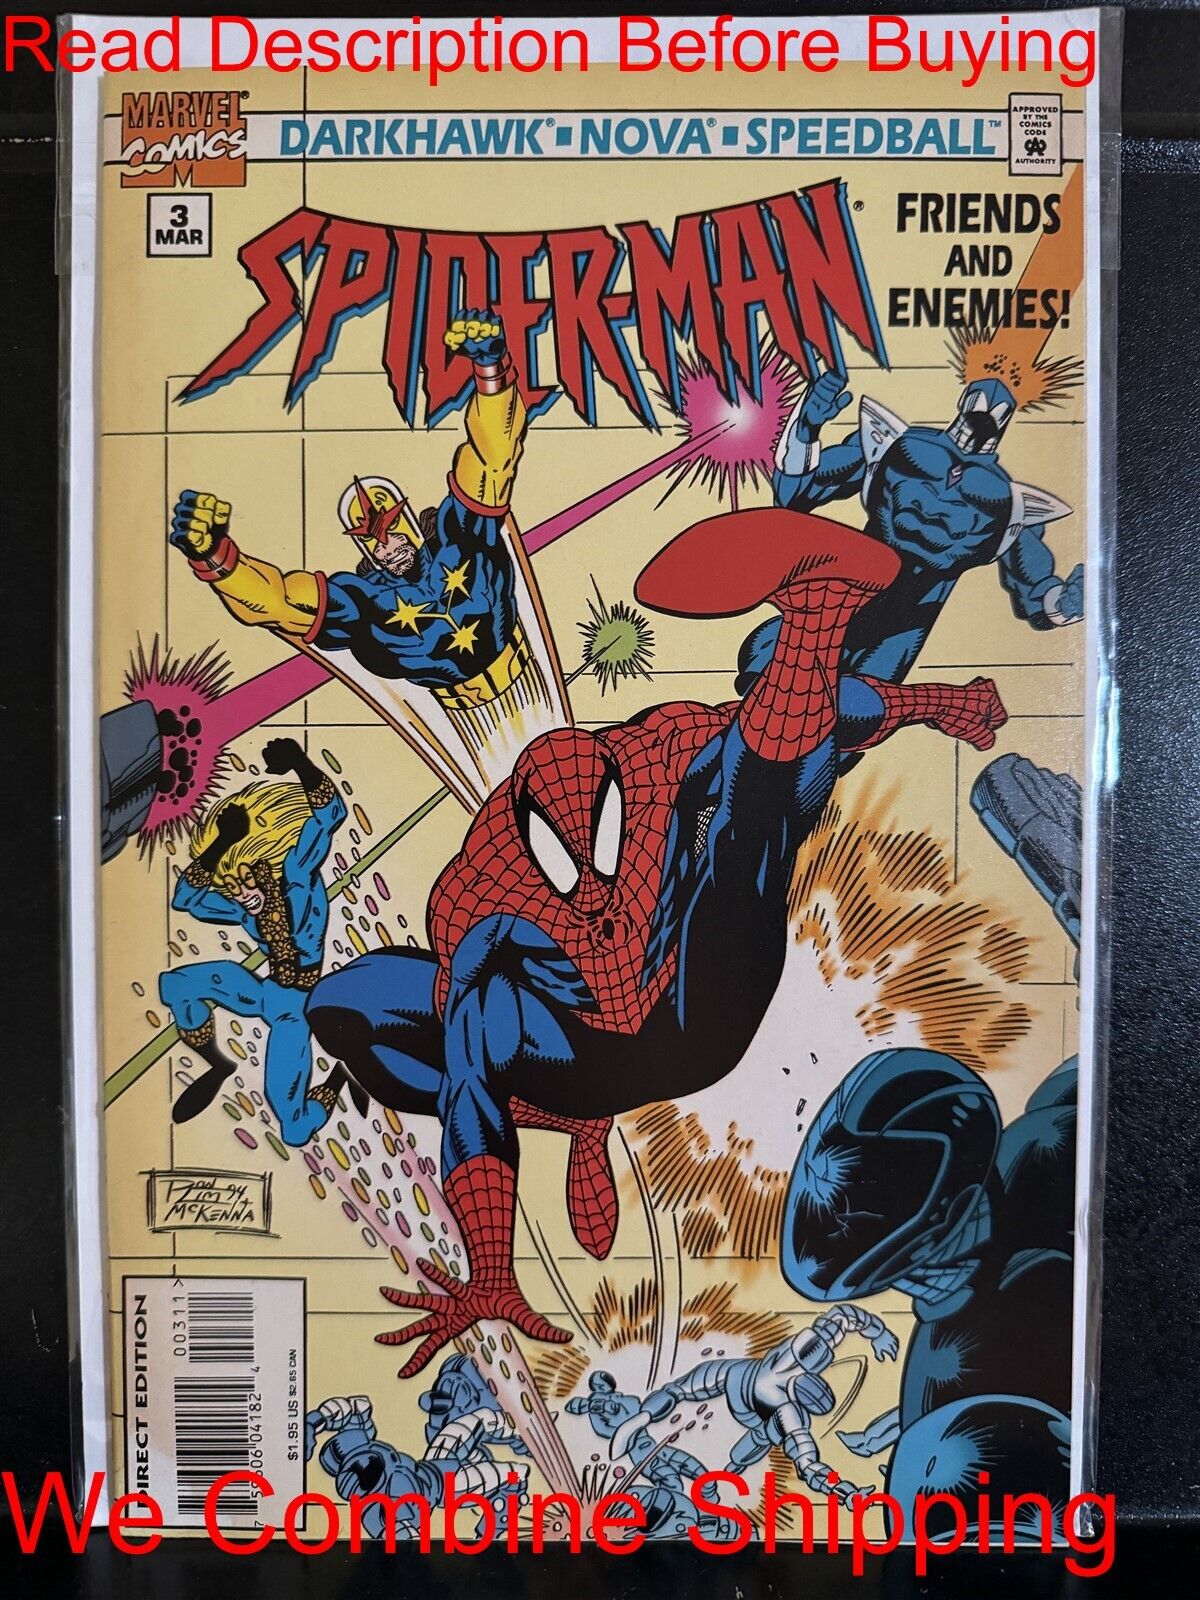 BARGAIN BOOKS ($5 MIN PURCHASE) Spider-Man Friends and Enemies #3 (1995 Marvel)